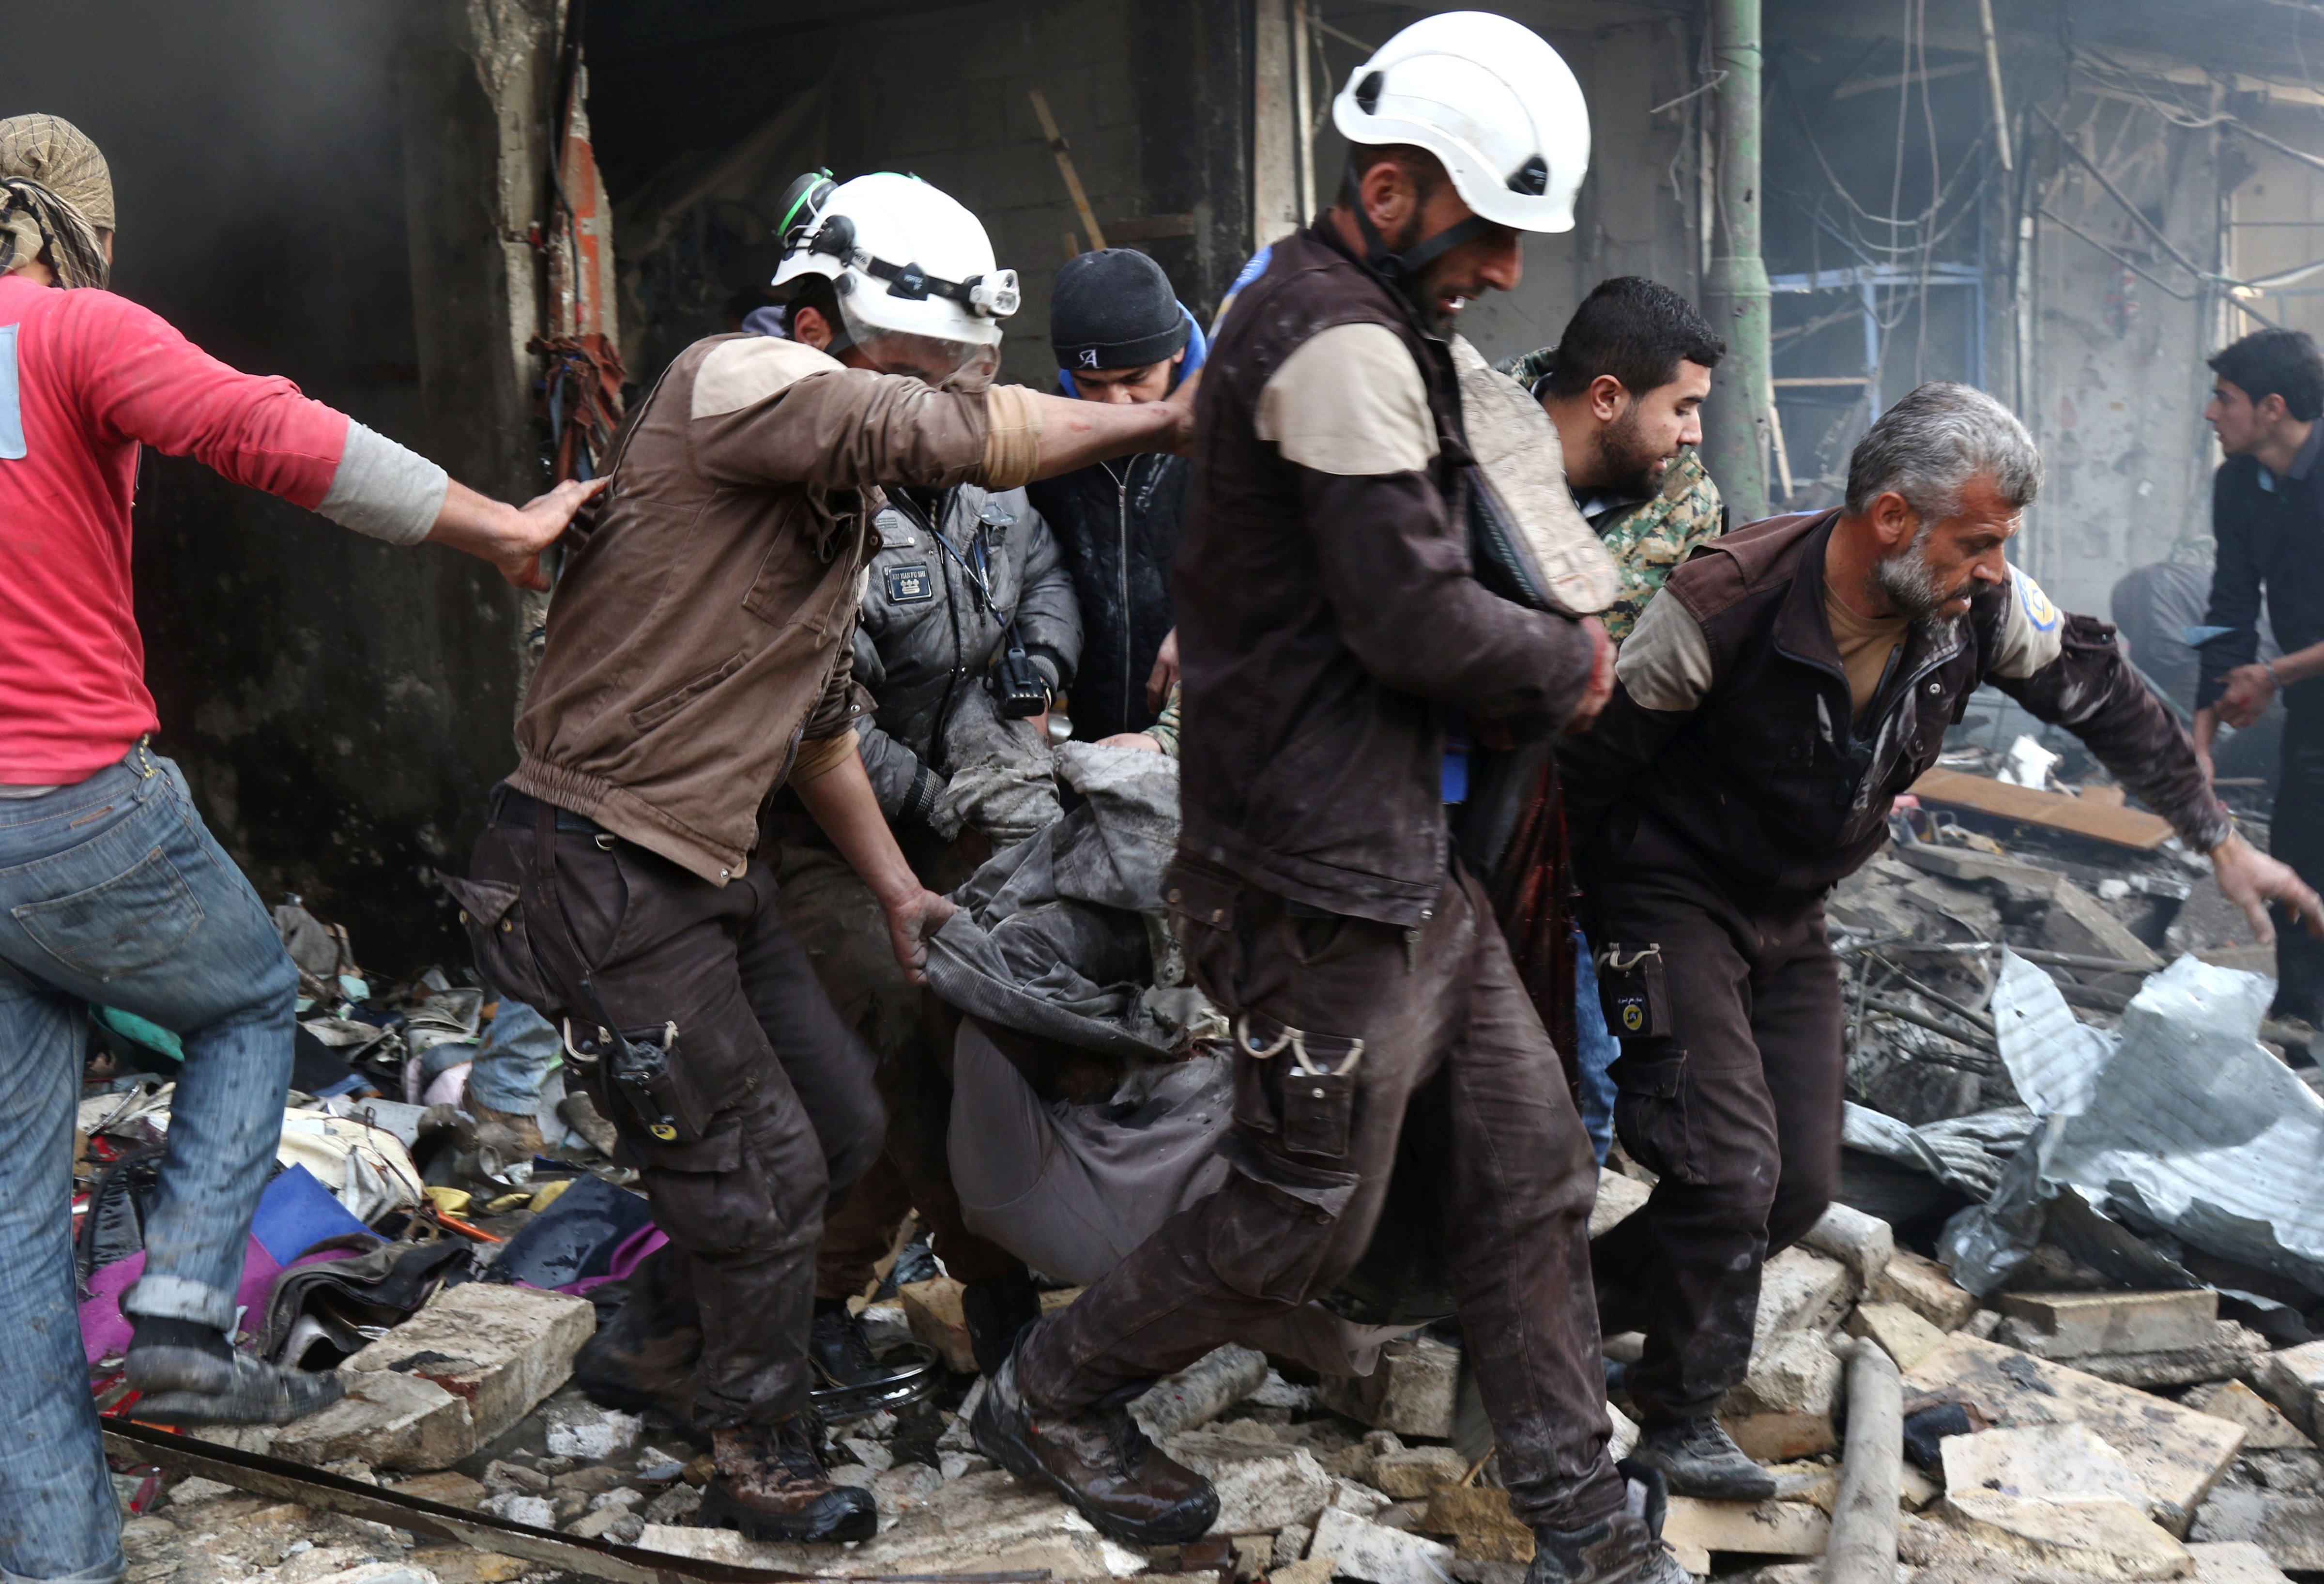 Syrian men and Civil Defence volunteers, also known as the White Helmets, evacuate a victim from a building following an air strike on the village of Maaret al-Numan, in the country's northern province of Idlib, on Dec. 4, 2016. (Mohamed Al-Bakour—AFP/Getty Images)